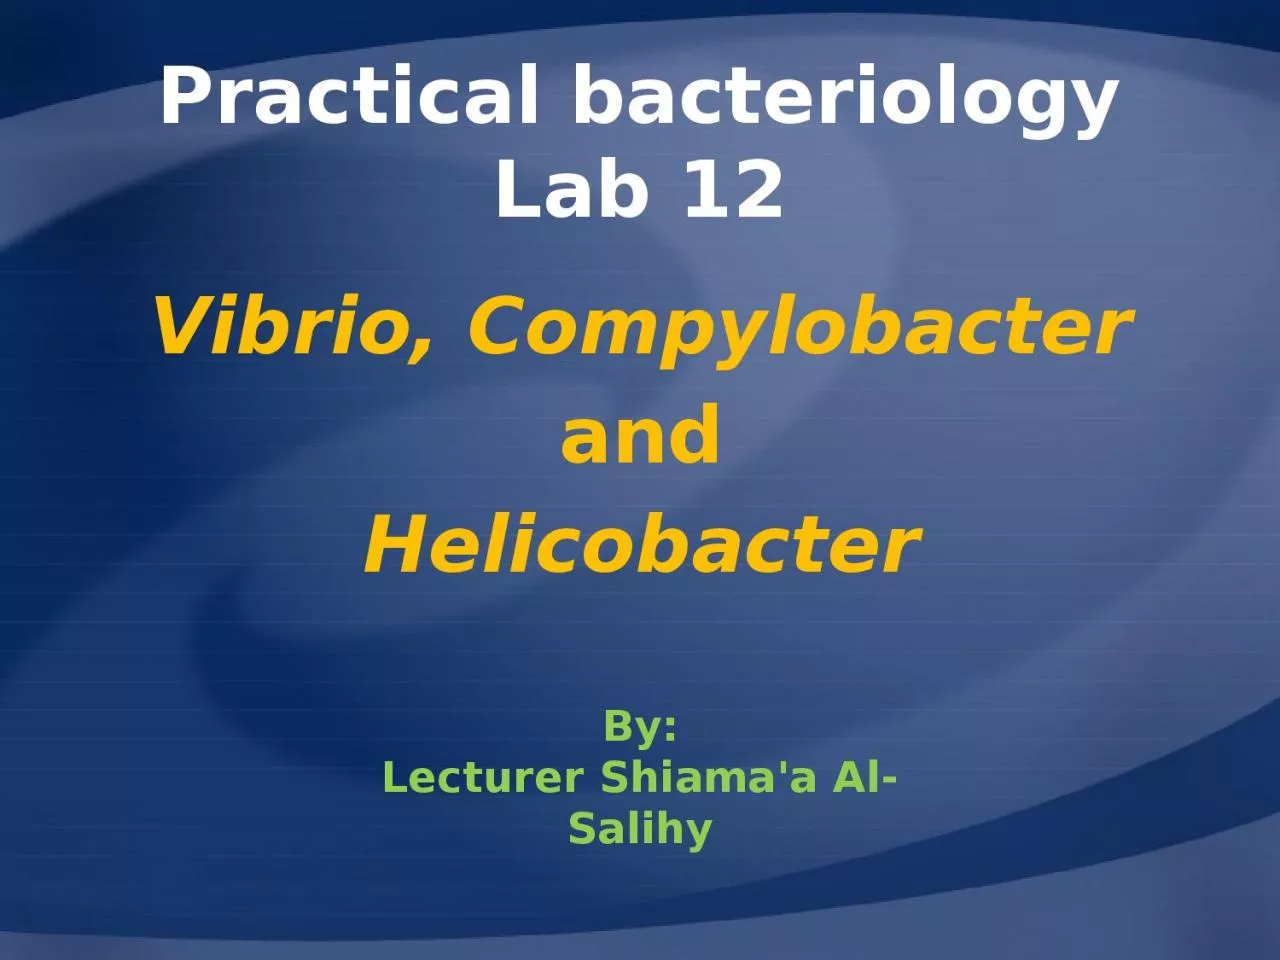 Practical bacteriology Lab 12